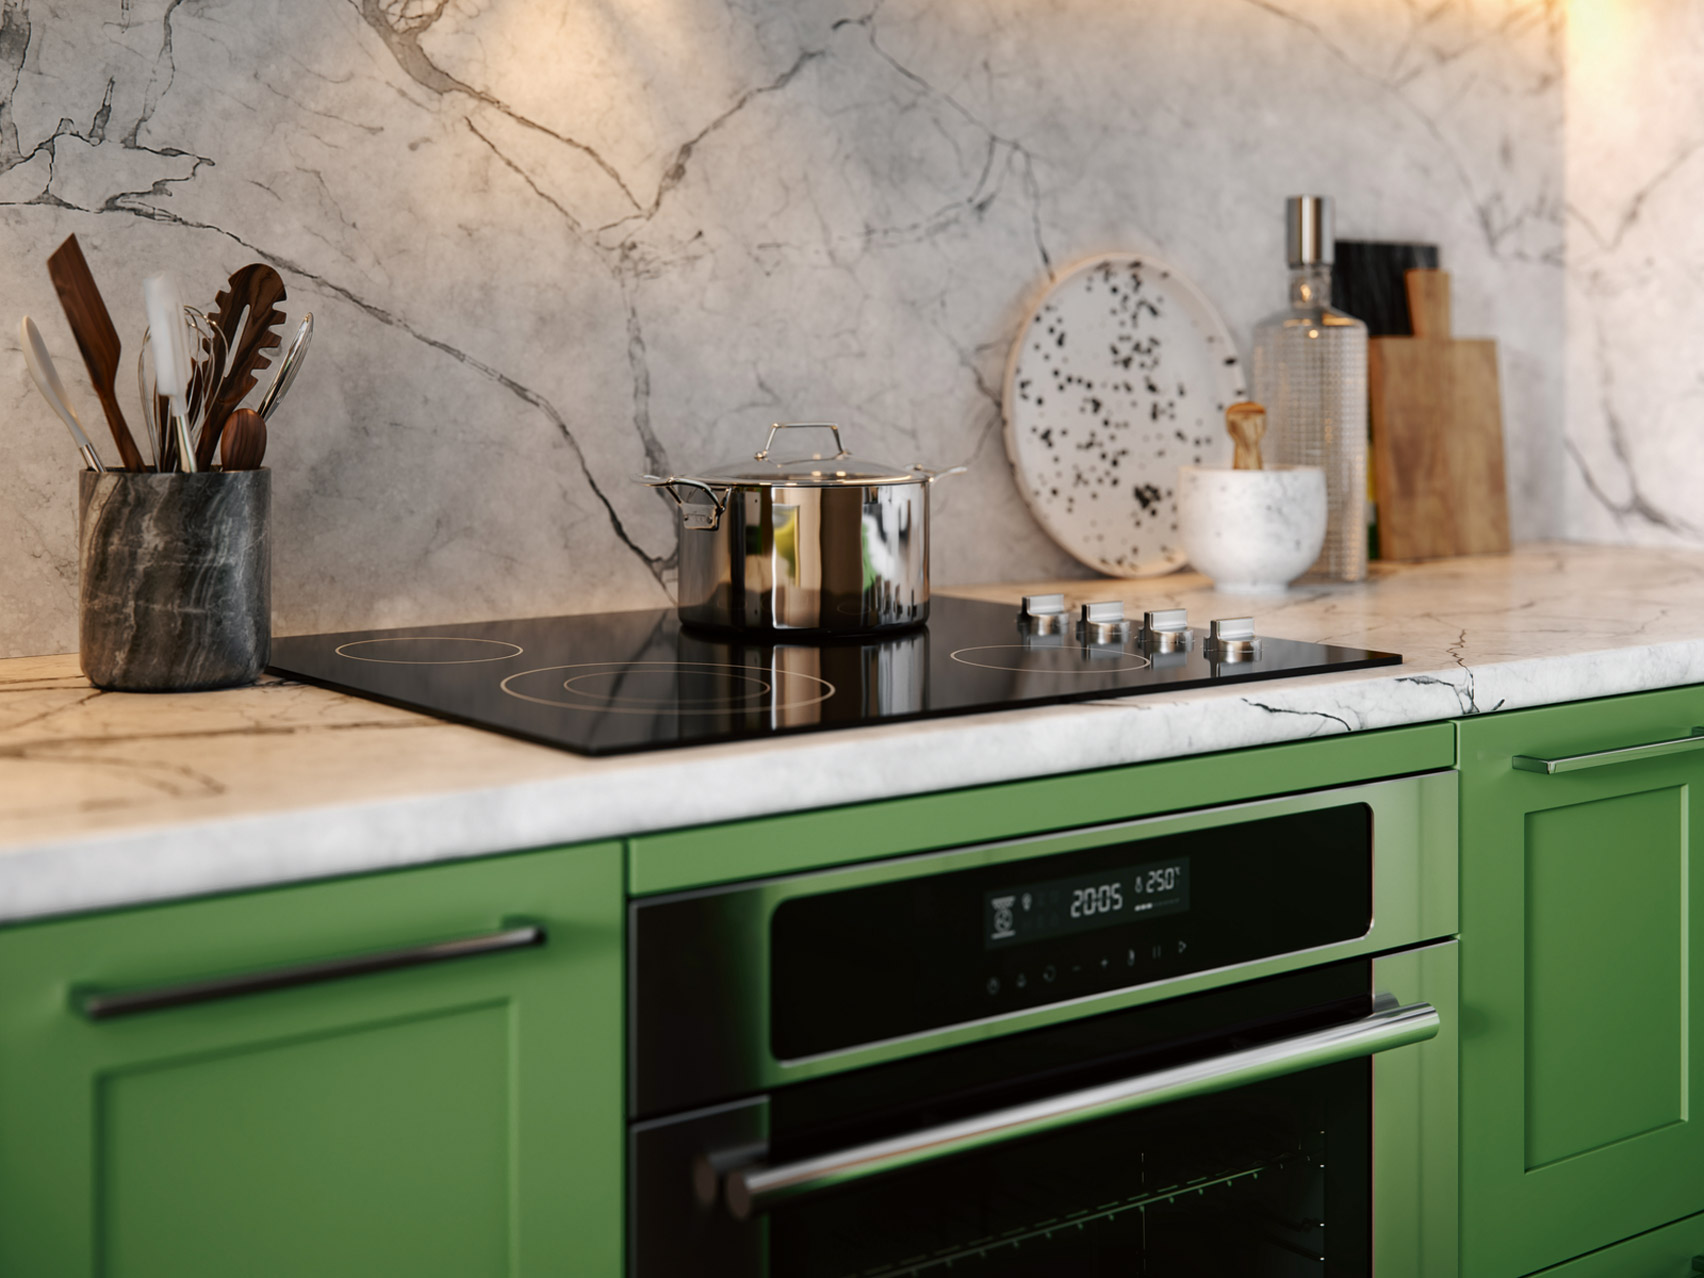 KOVA launches Compact Appliance collection for modern kitchens